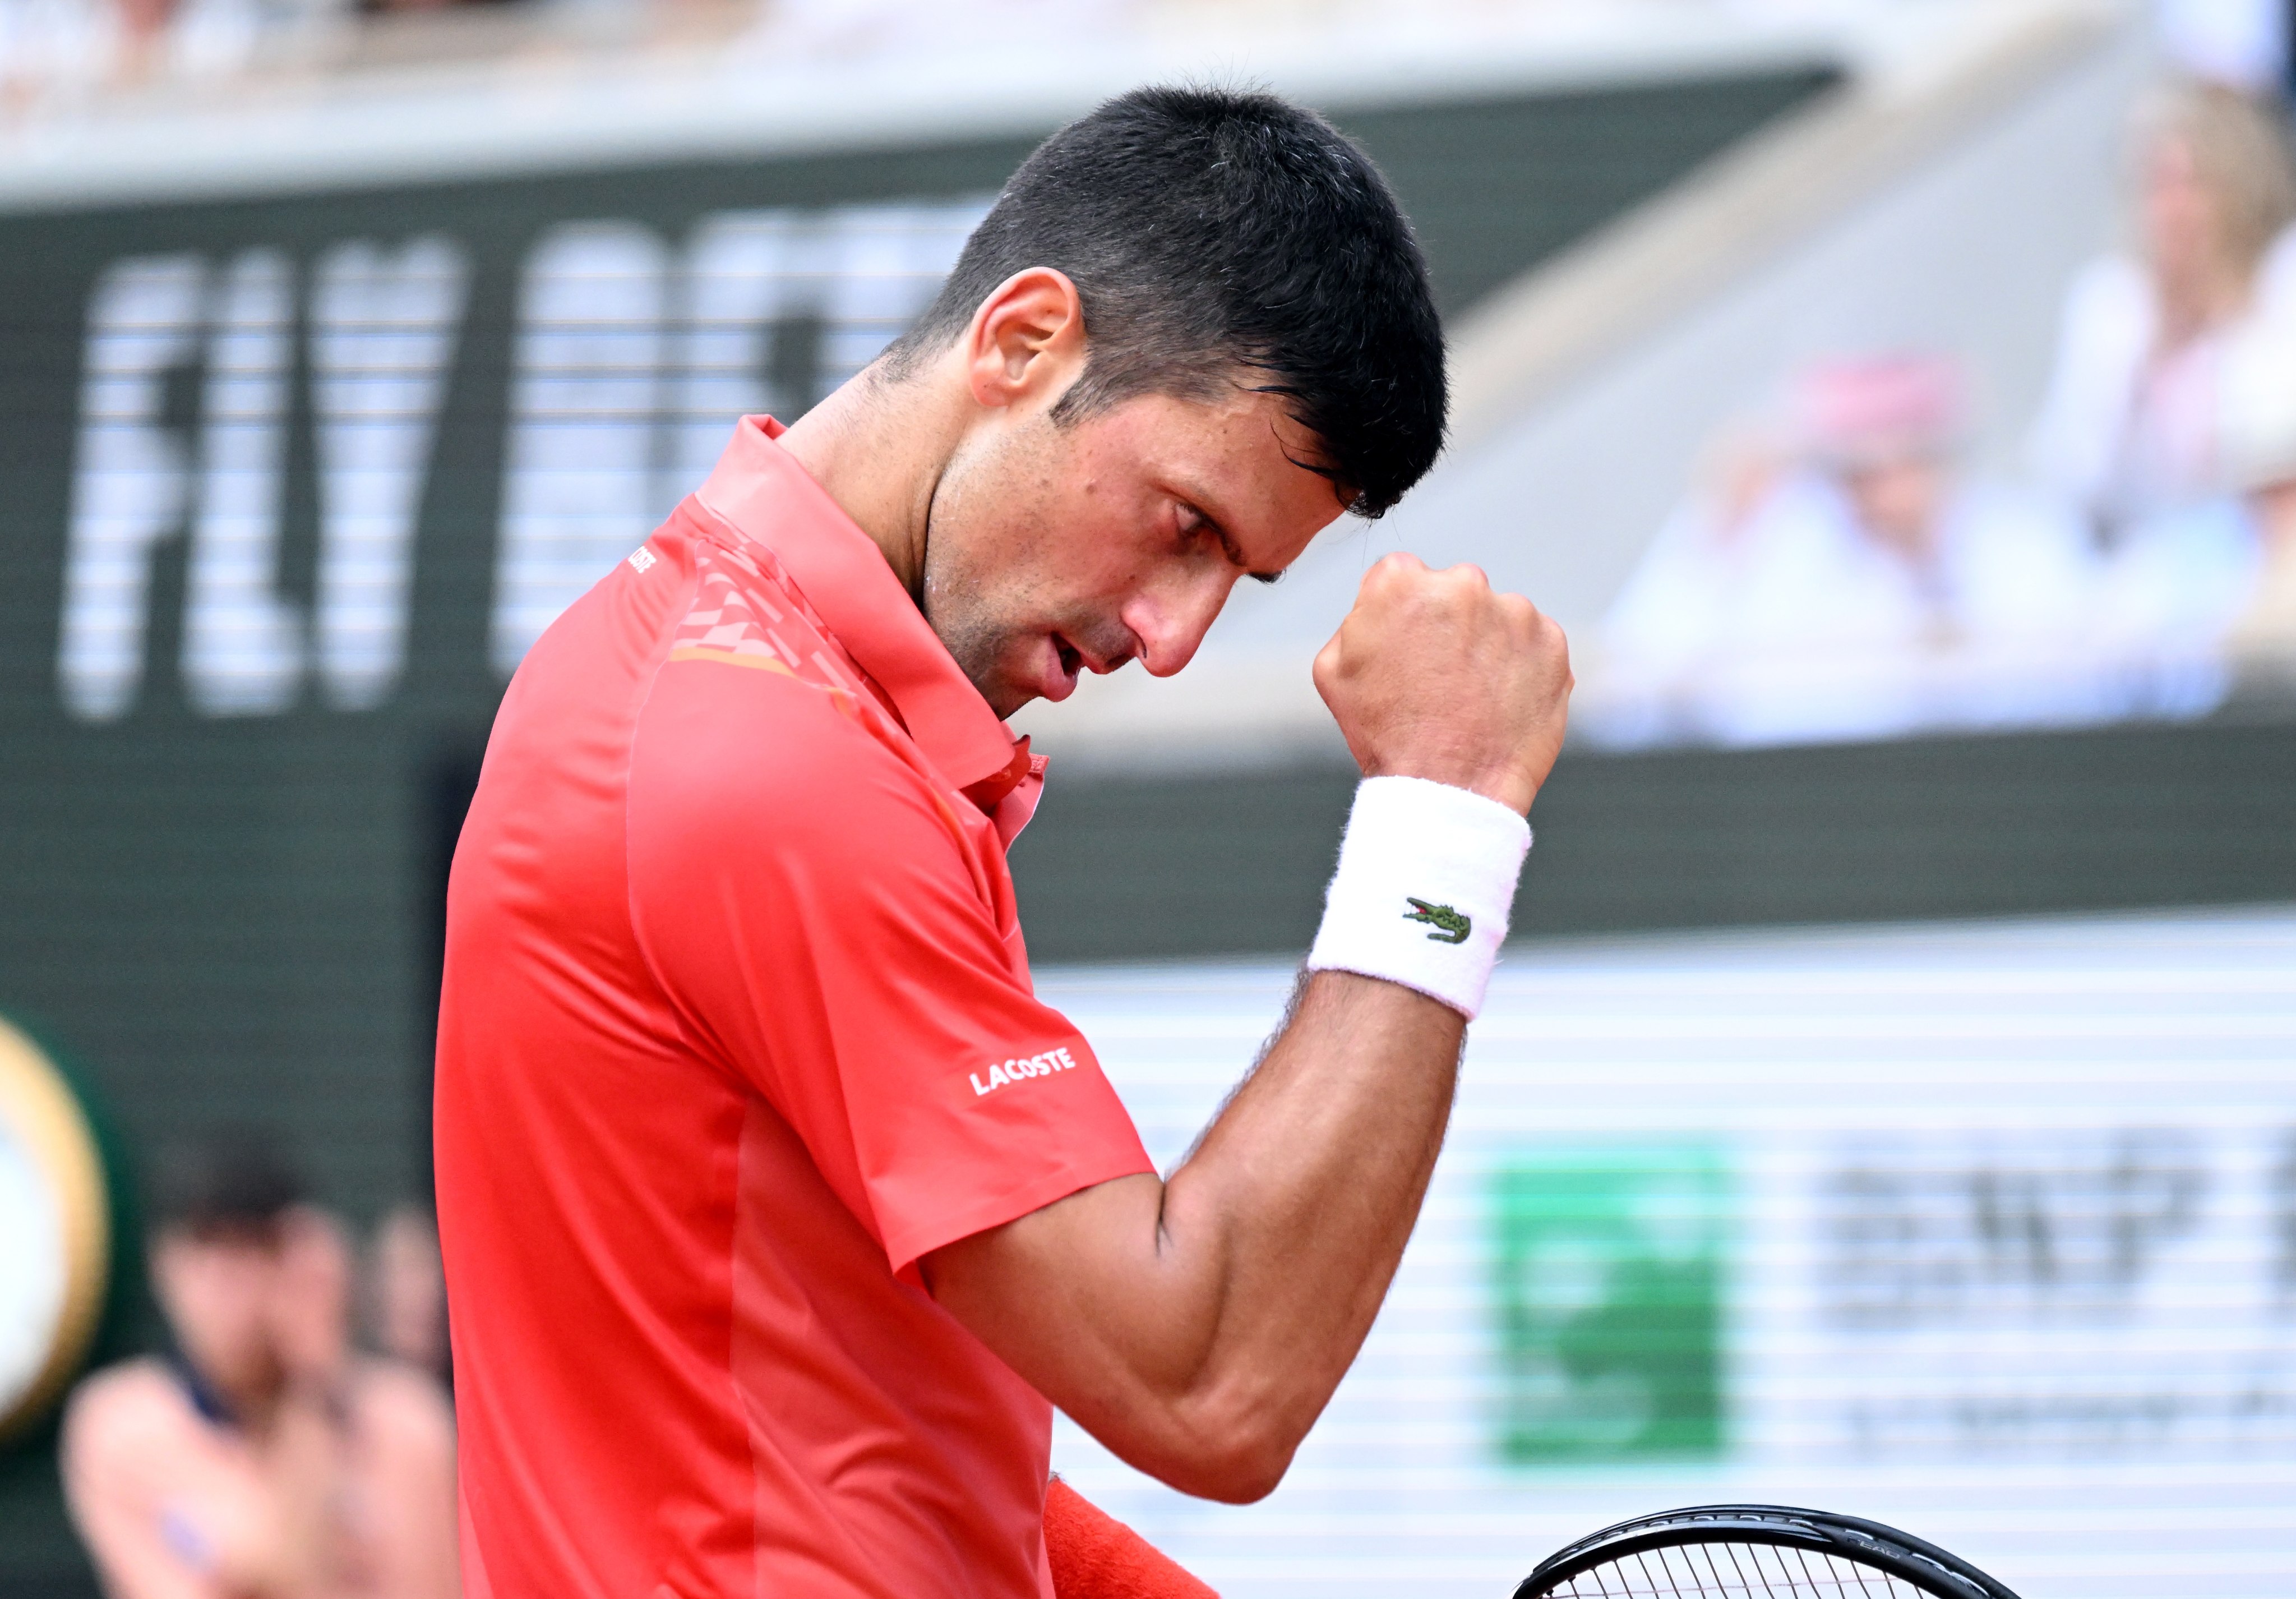 Serbia’s Novak Djokovic of Serbia beat Norway’s Casper Ruud to win the French Open tennis tournament at the Stade Roland Garros in Paris, France on Sunday. Photo: EPA-EFE